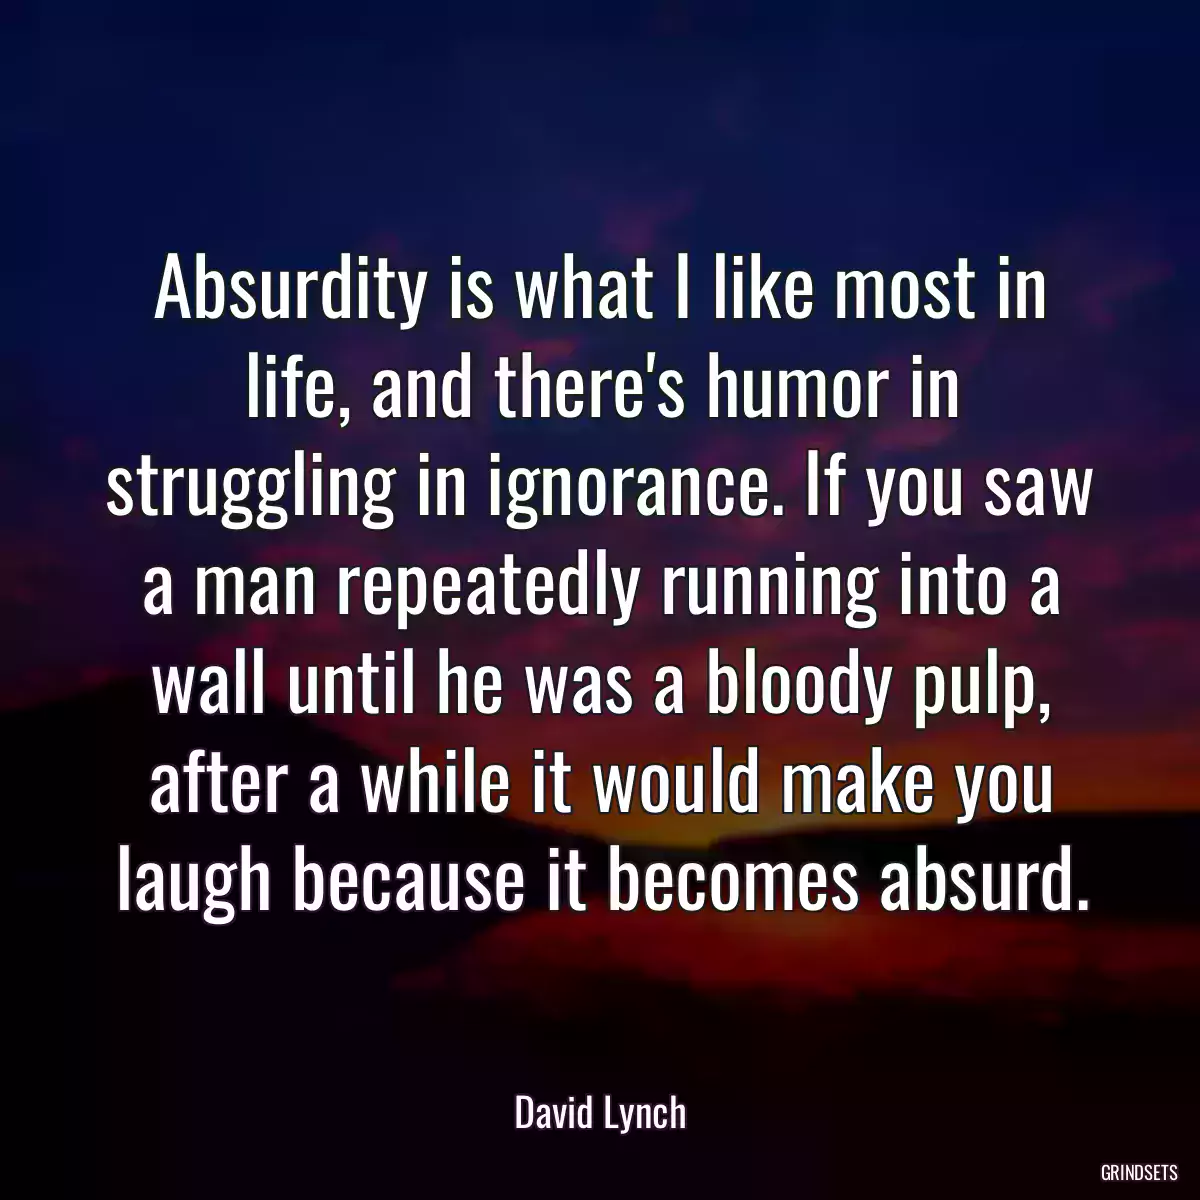 Absurdity is what I like most in life, and there\'s humor in struggling in ignorance. If you saw a man repeatedly running into a wall until he was a bloody pulp, after a while it would make you laugh because it becomes absurd.